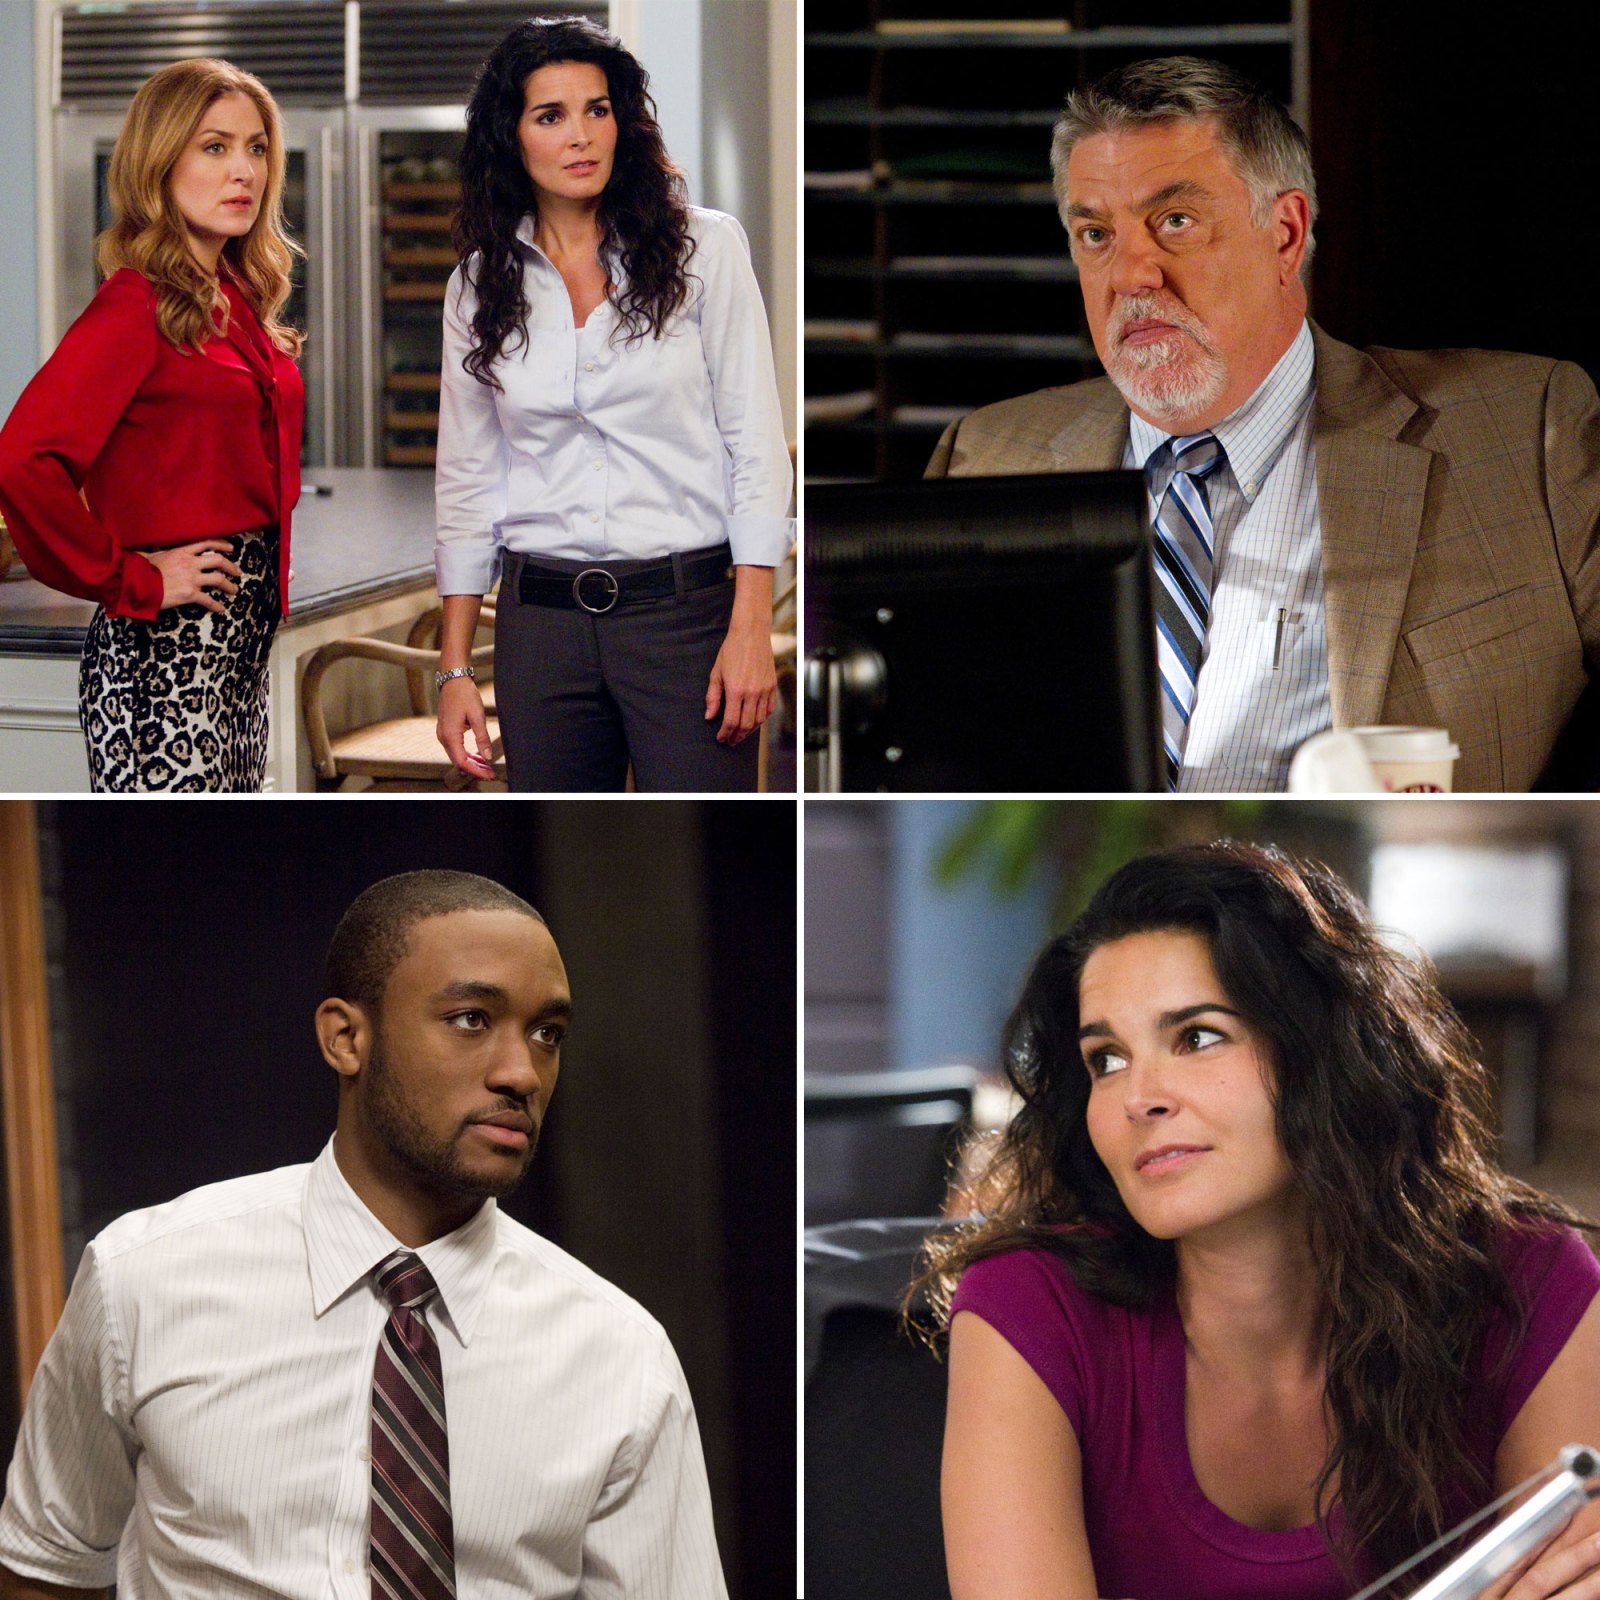 Rizzoli & Isles' Cast: Where Are They Now?